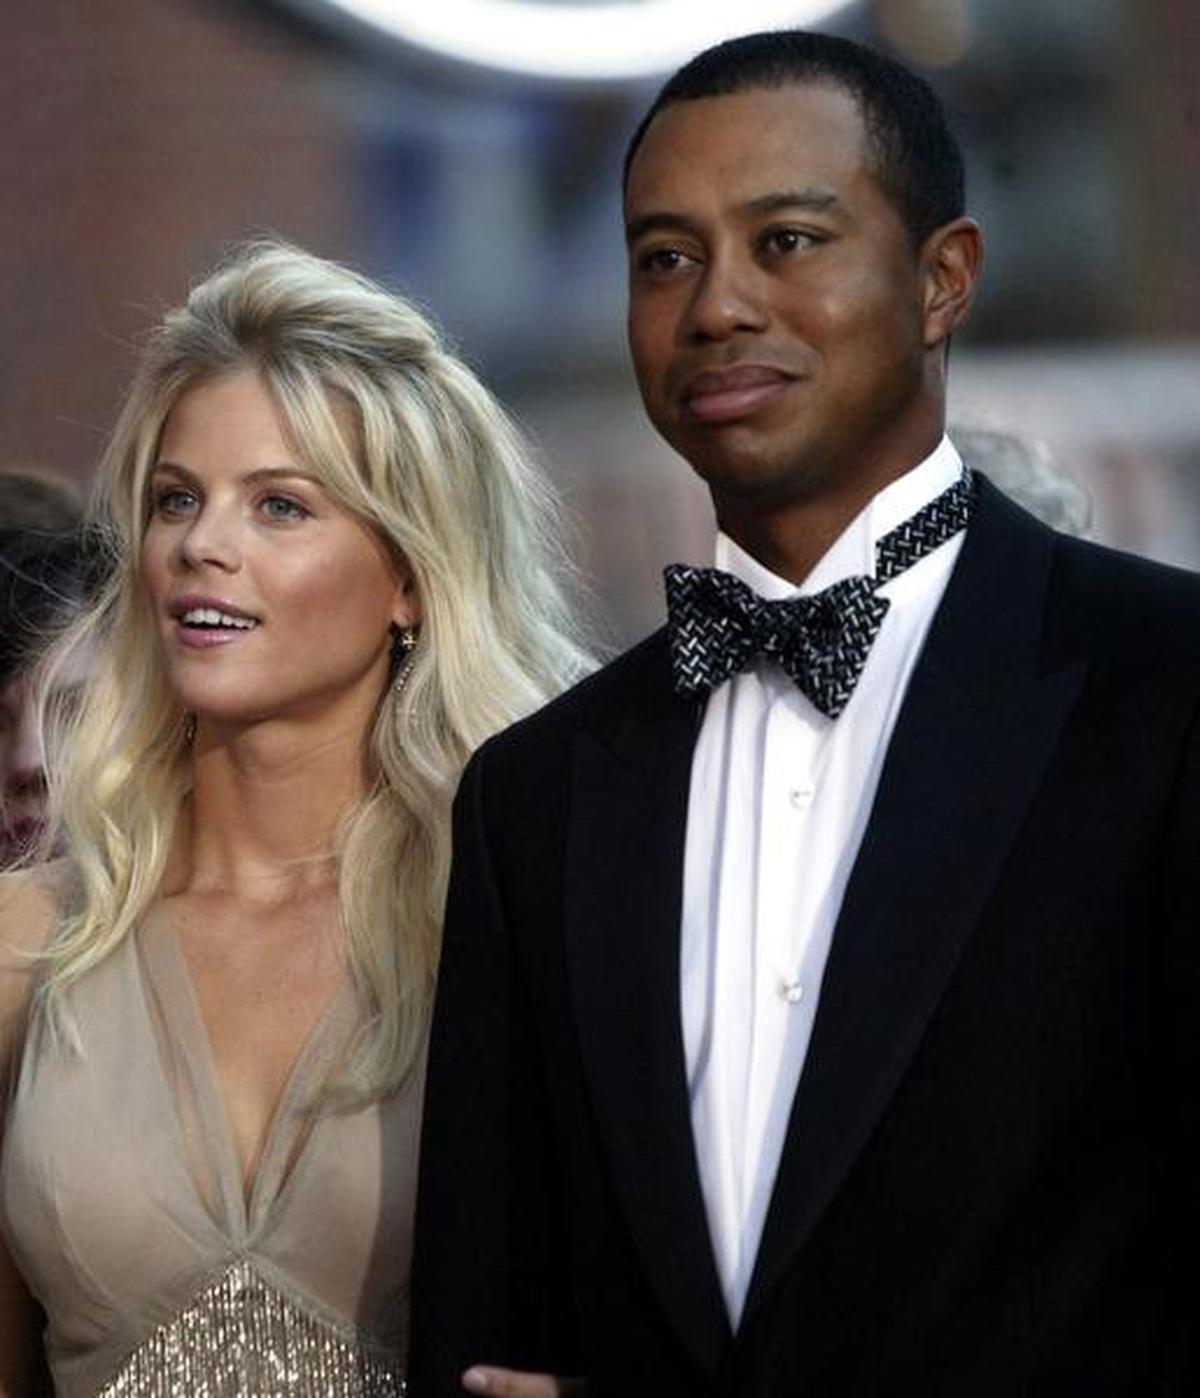 Tiger Woods and Elin Nordegren, photographed in 2004